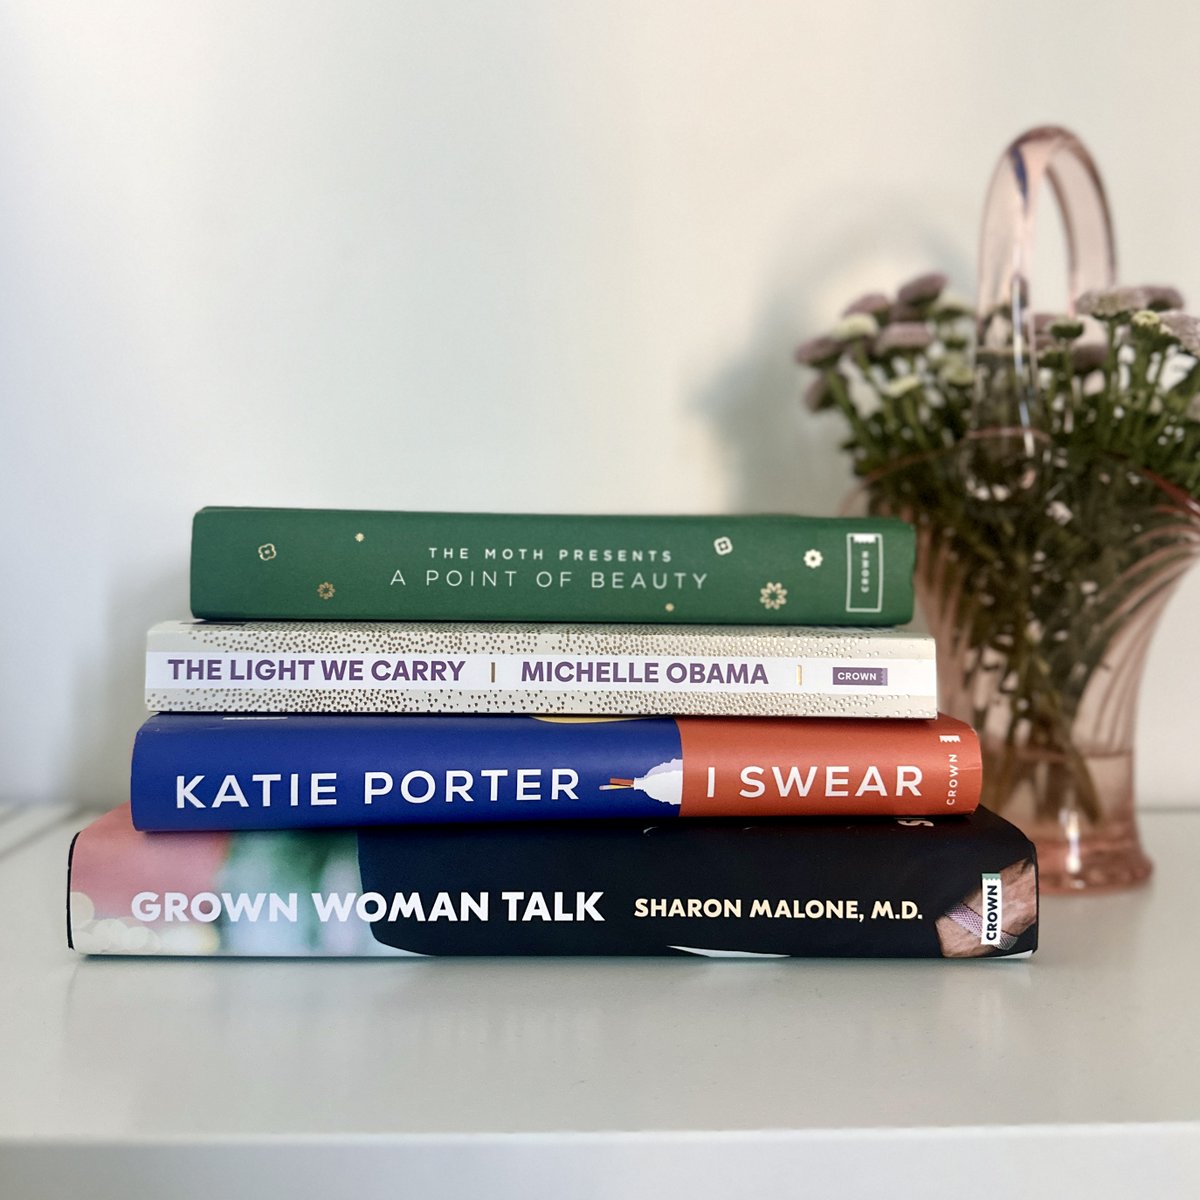 Mother's Day is two weeks away! If you are wondering what to get the mothers and mother figures in your life, we've got some suggestions! We put together this stack of titles we think would make perfect gifts, we hope you find something great!